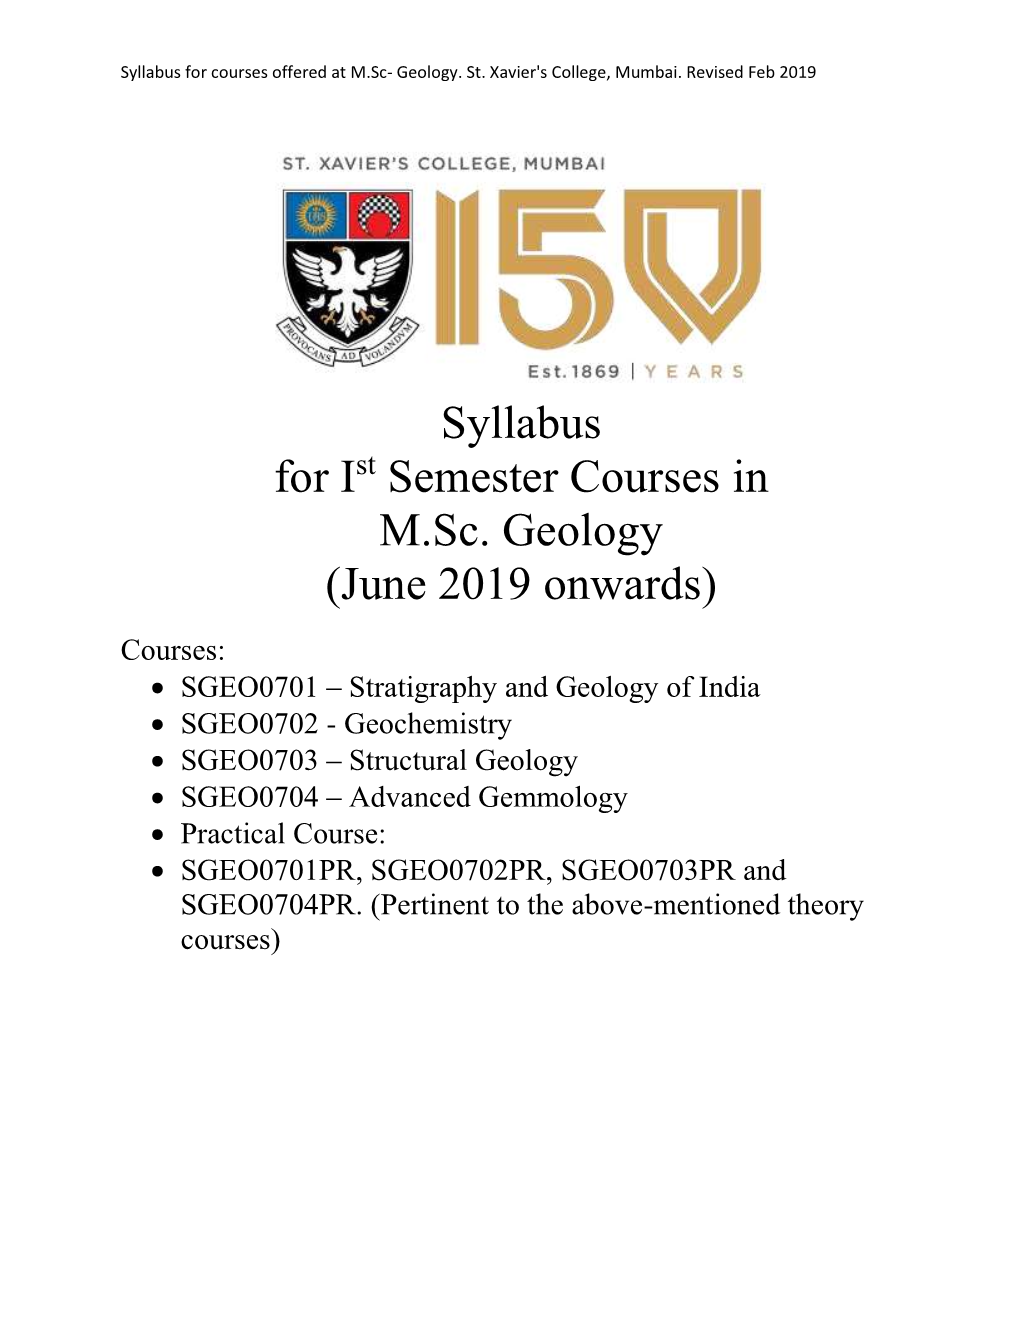 Syllabus for Ist Semester Courses in M.Sc. Geology (June 2019 Onwards)